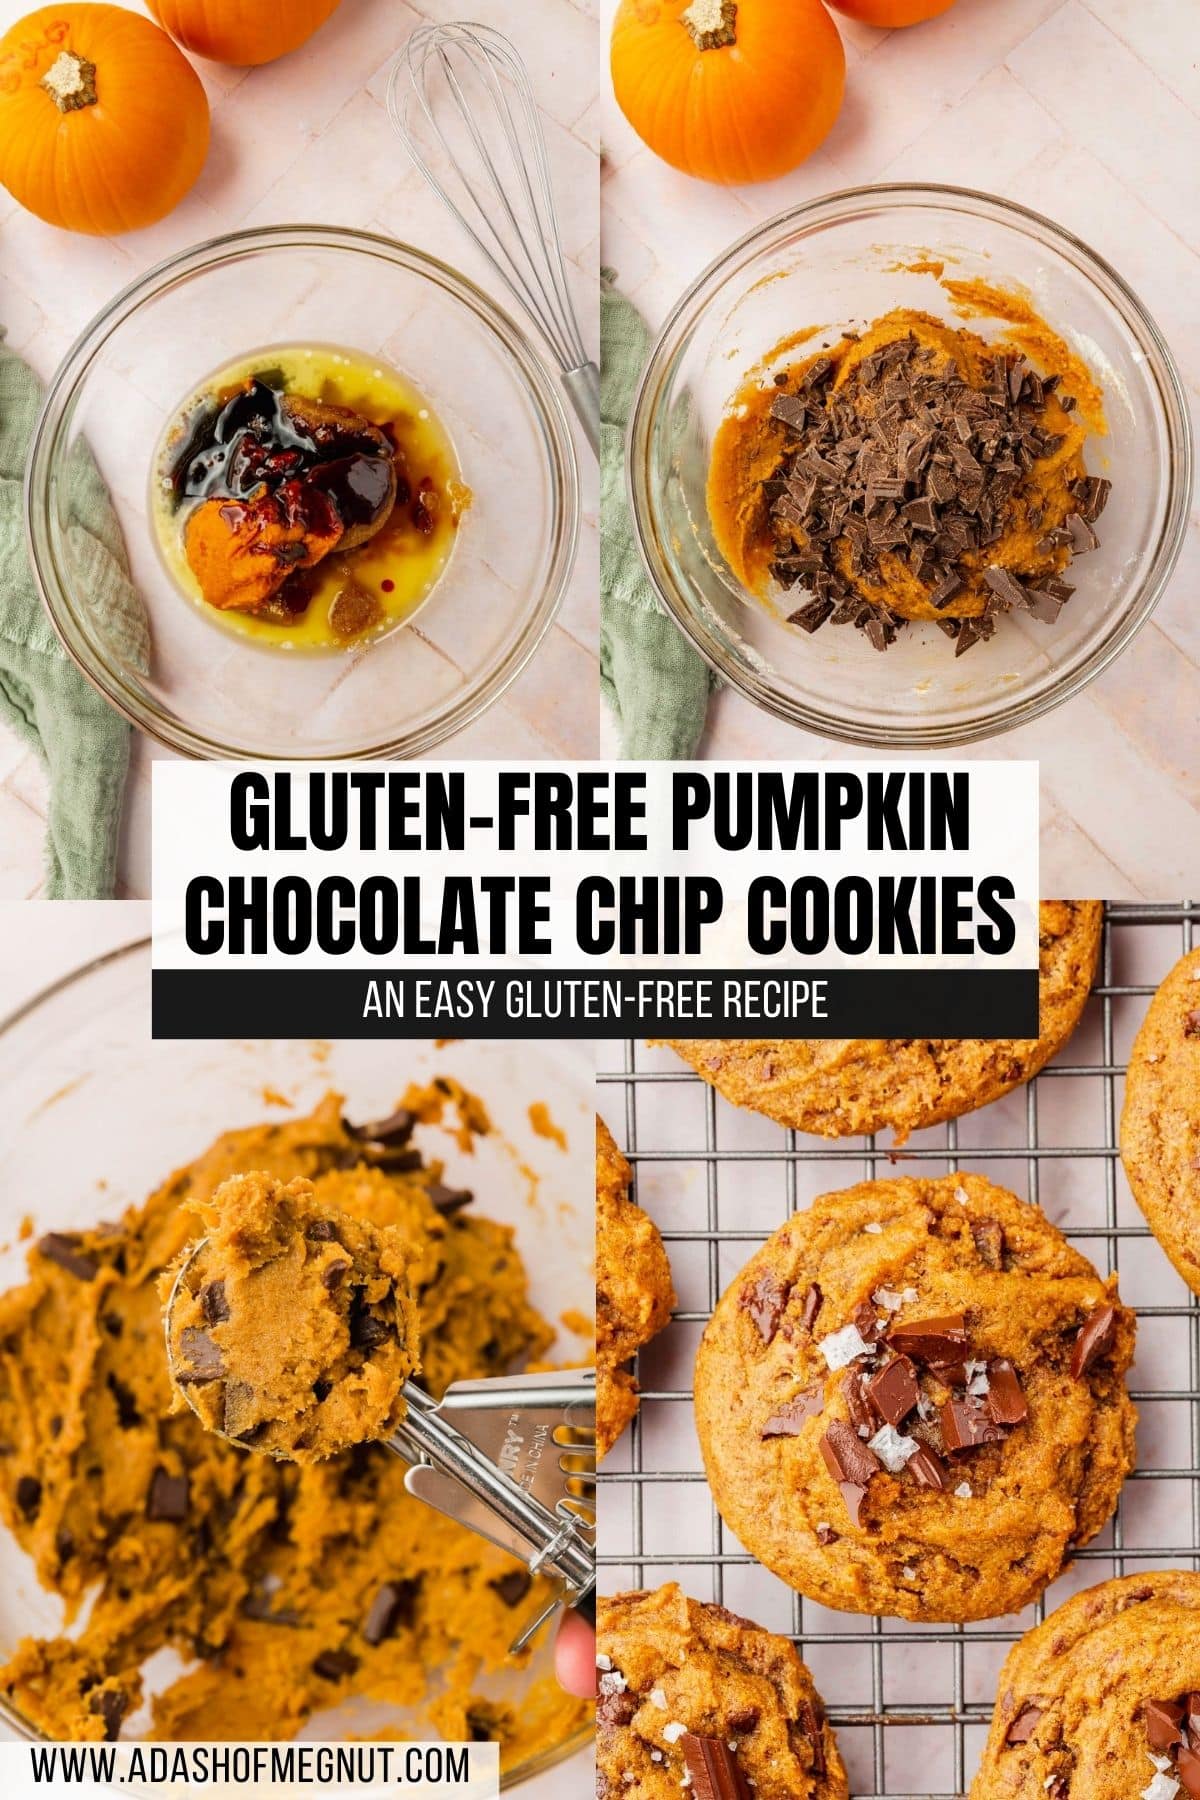 A four photo collage showing the process of making gluten-free pumpkin chocolate chip cookies. Photo 1: A mixing bowl with molasses, brown sugar, melted butter, pumpkin puree, and vanilla before mixing. Photo 2: A mixing bowl with gluten-free pumpkin cookie dough topped with chopped chocolate. Photo 3: A portion scoop filled with gluten-free pumpkin chocolate chunk cookie dough over a bowl of more dough. Photo 4: A closeup of gluten-free pumpkin chocolate chip cookies on top of a cooling rack.